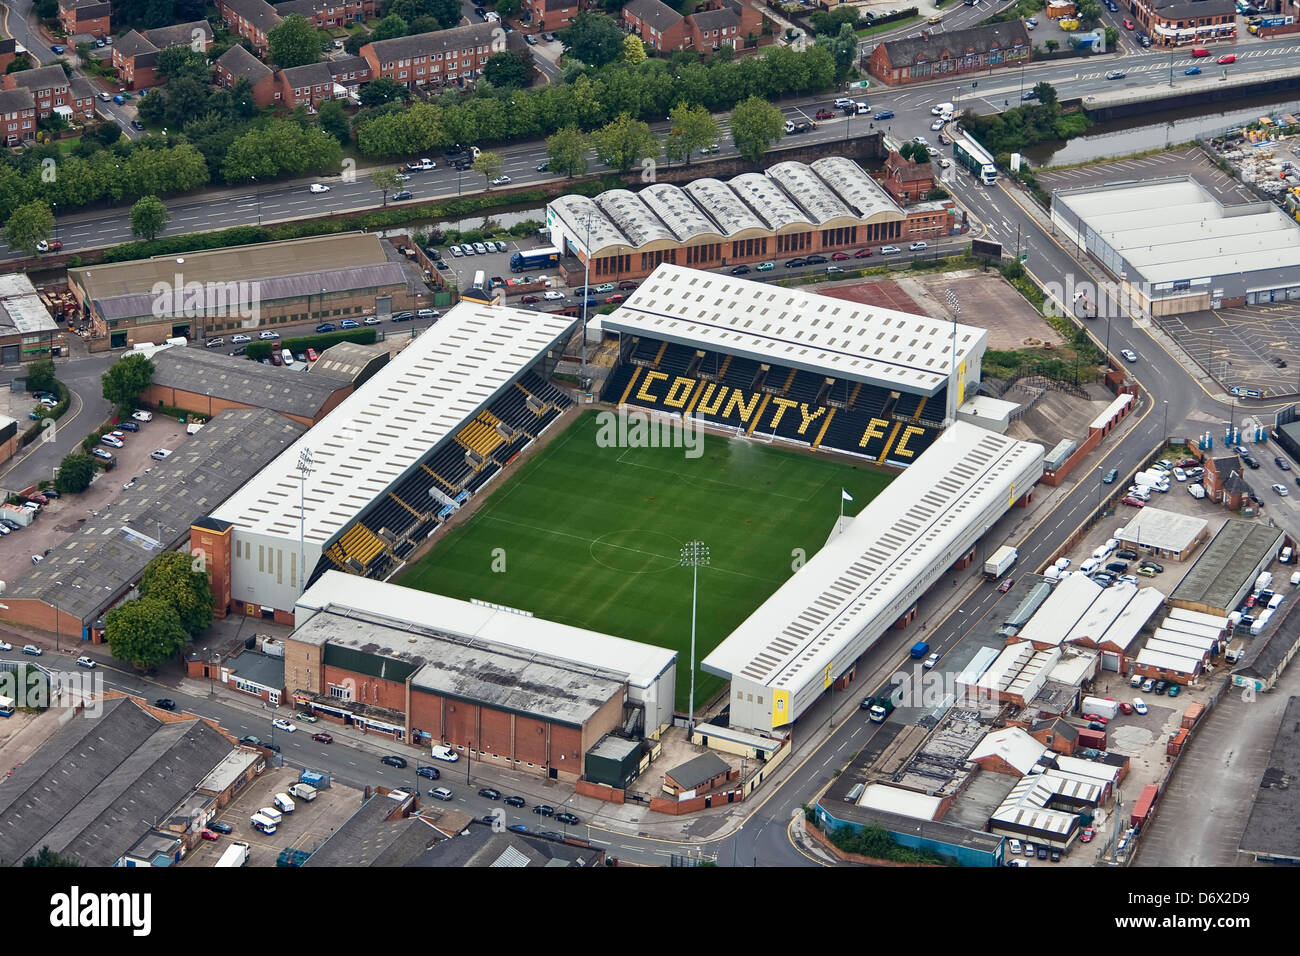 Aerial image of Notts County Football Club ground at Meadow Lane Stock  Photo - Alamy